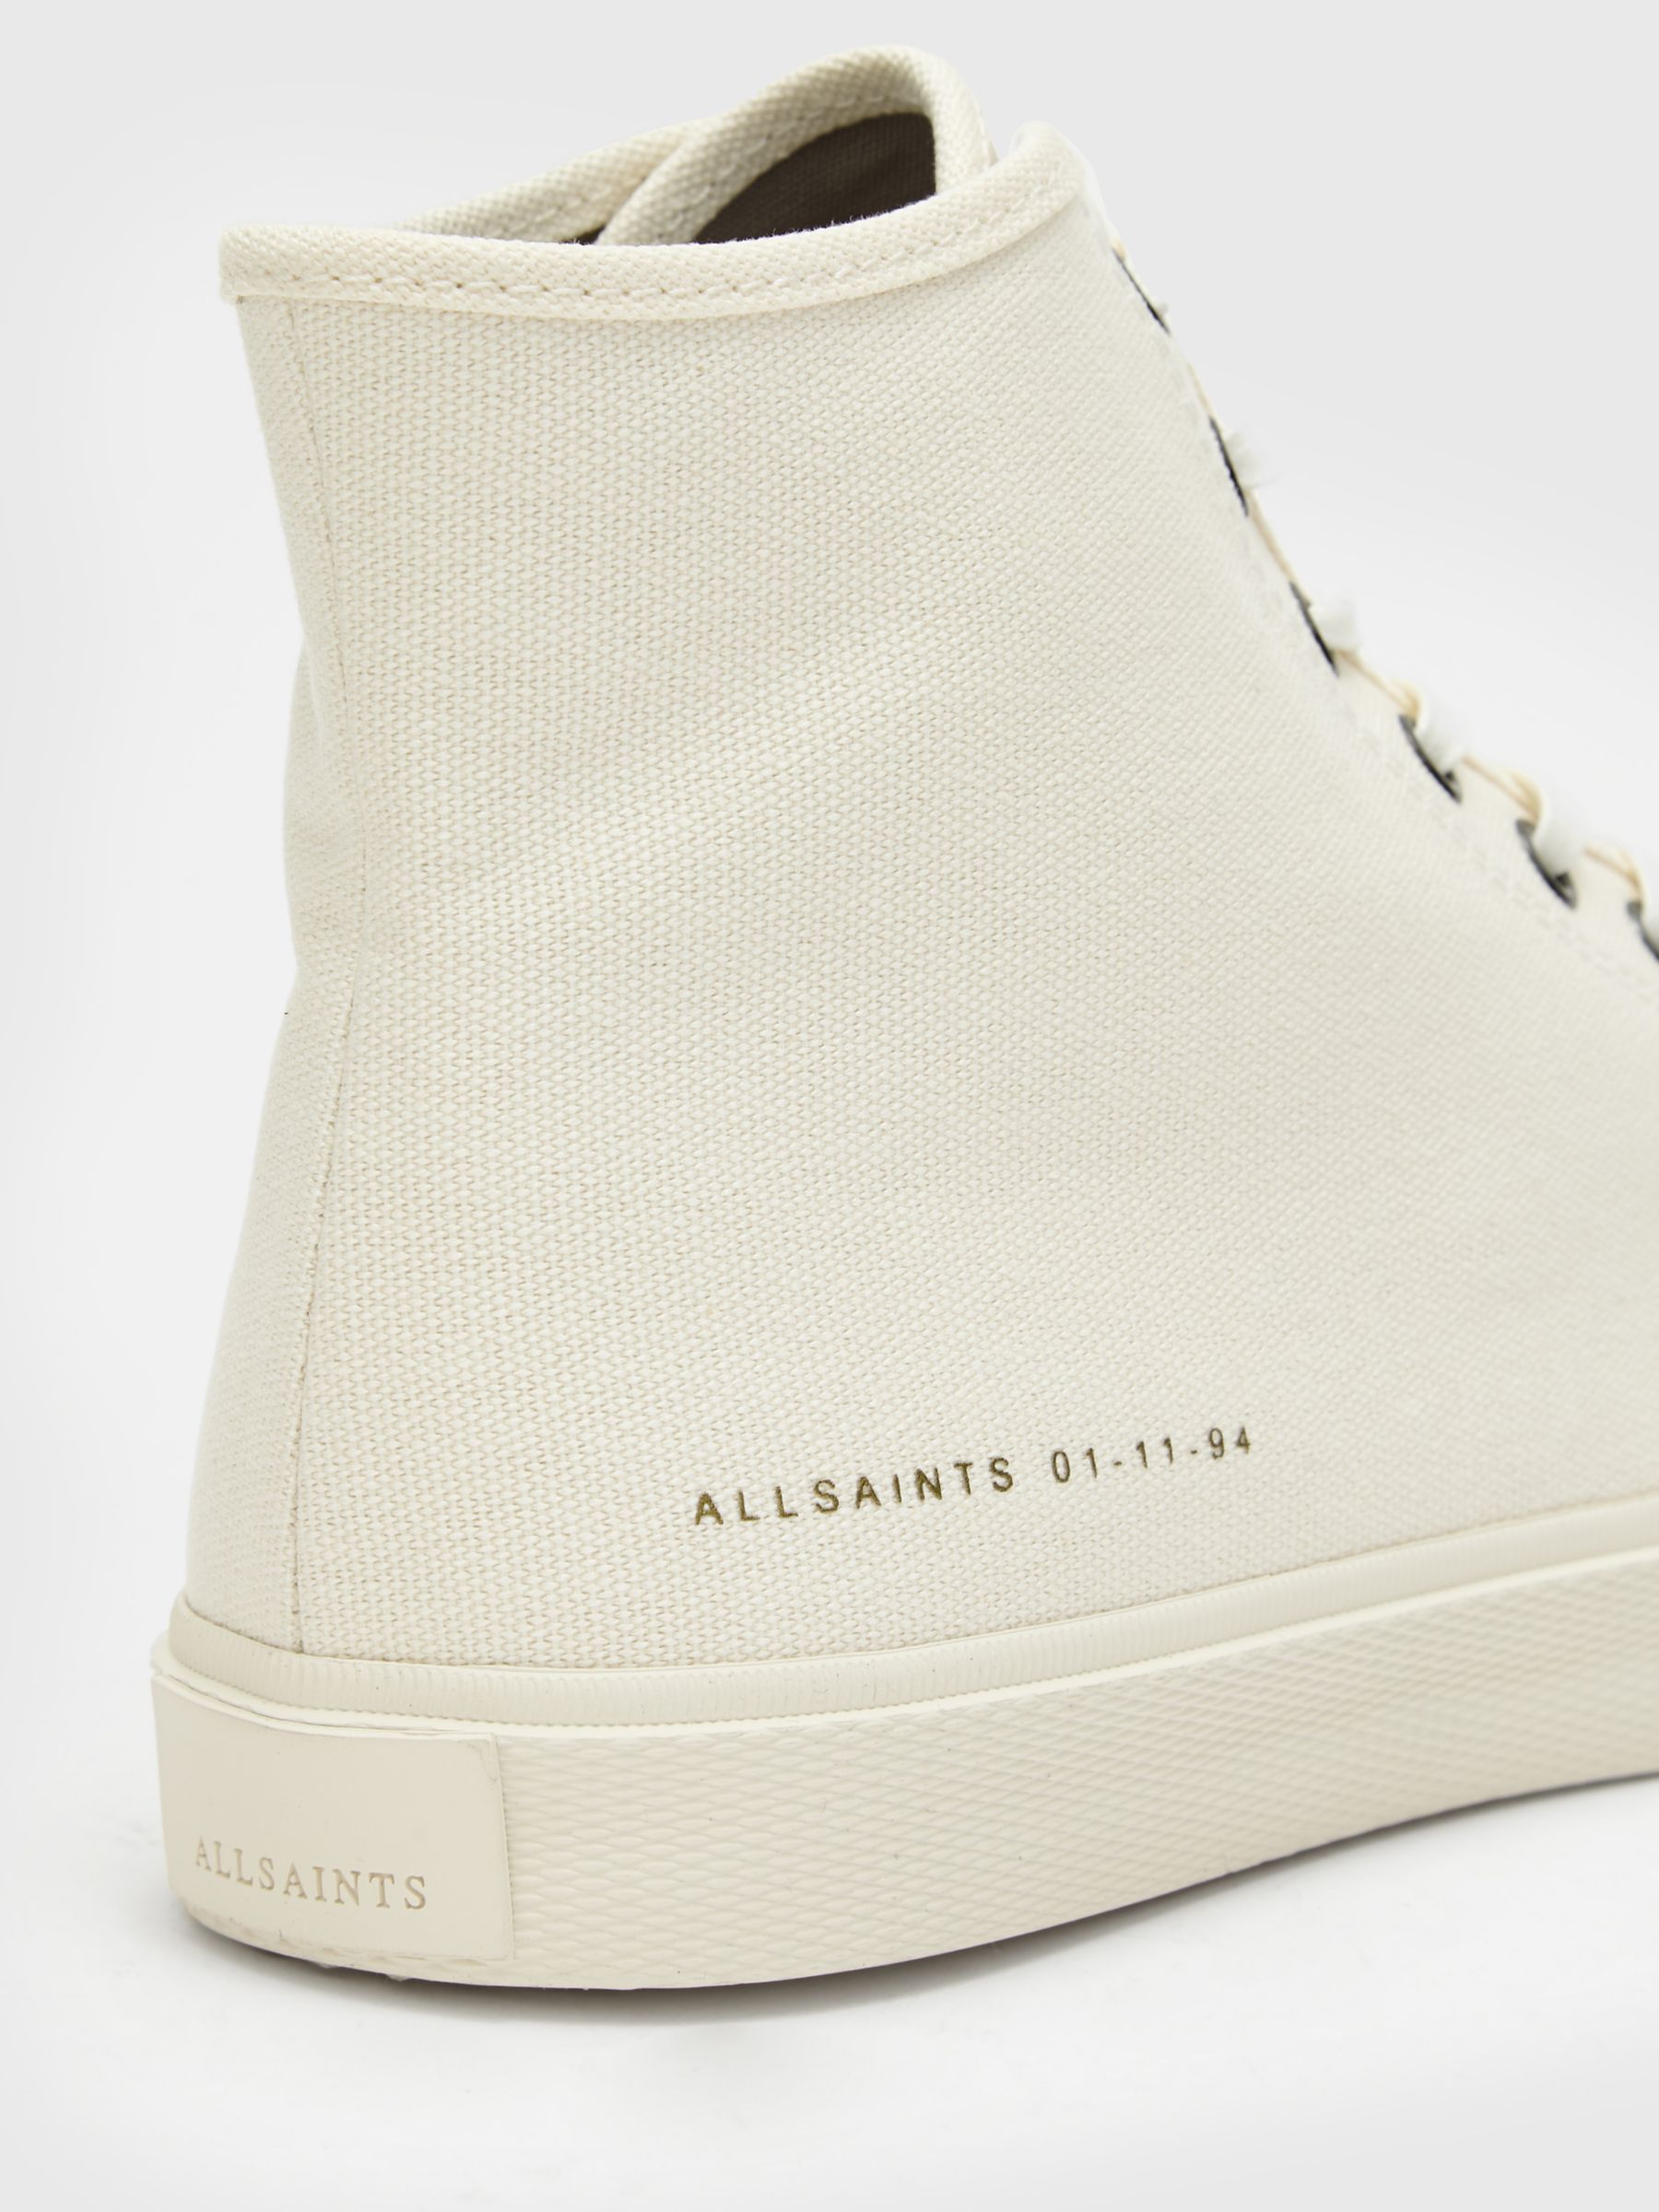 Buy AllSaints Bryce Canvas High Top Trainers Online at johnlewis.com